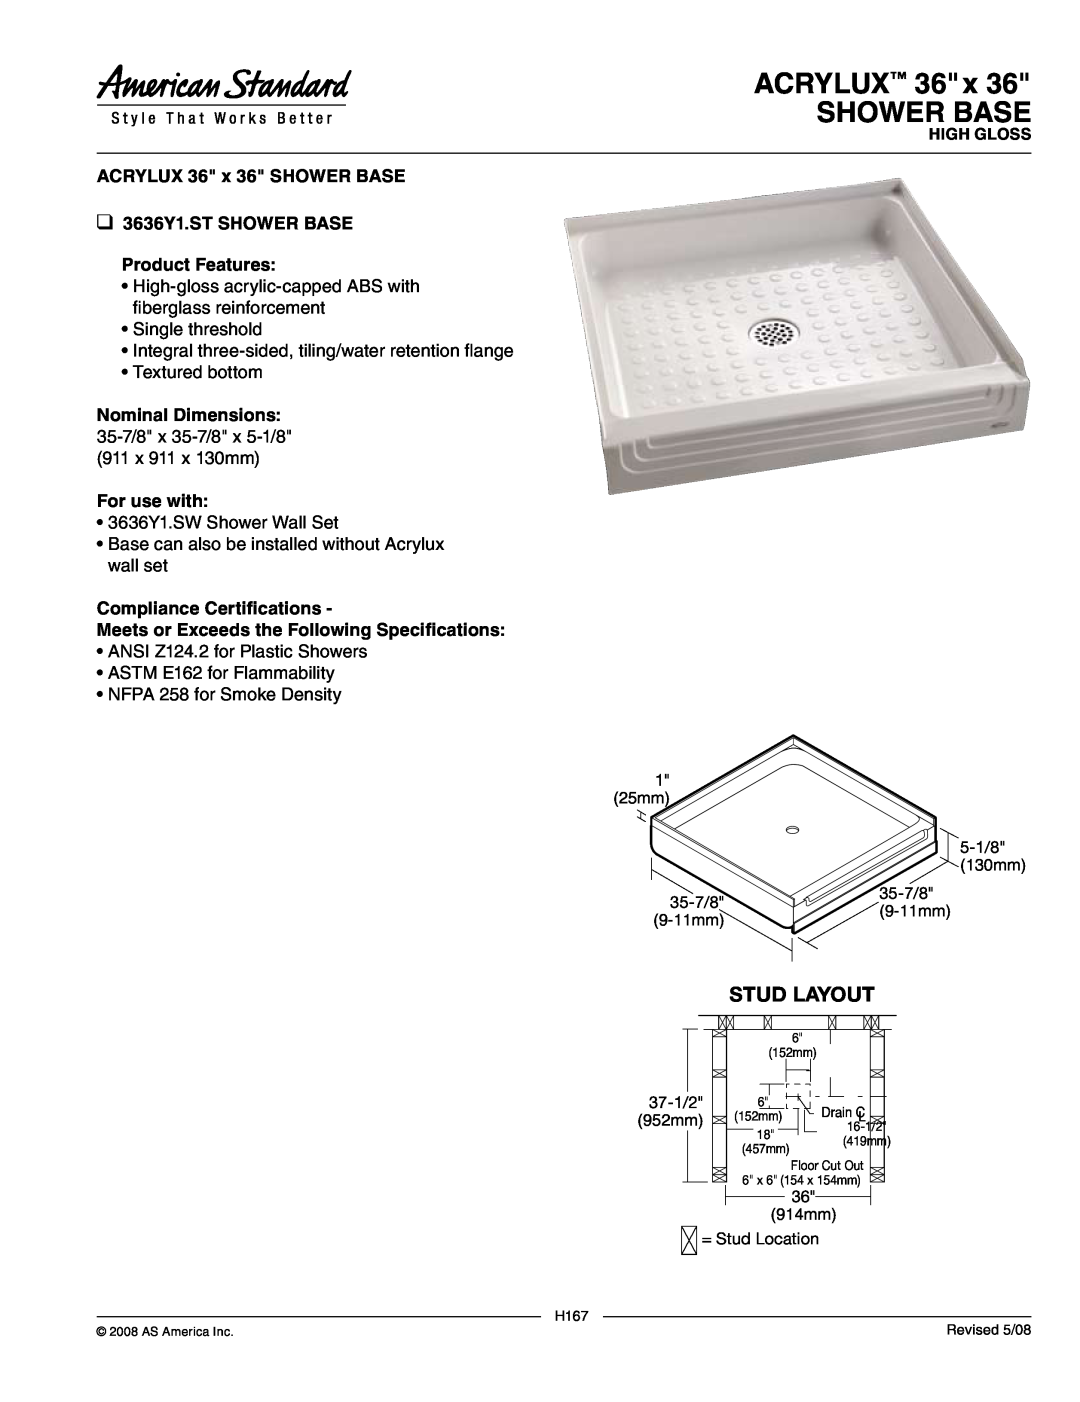 American Standard 3636Y1.ST dimensions ACRYLUX 36 x SHOWER BASE, Stud Layout, ACRYLUX 36 x 36 SHOWER BASE, For use with 